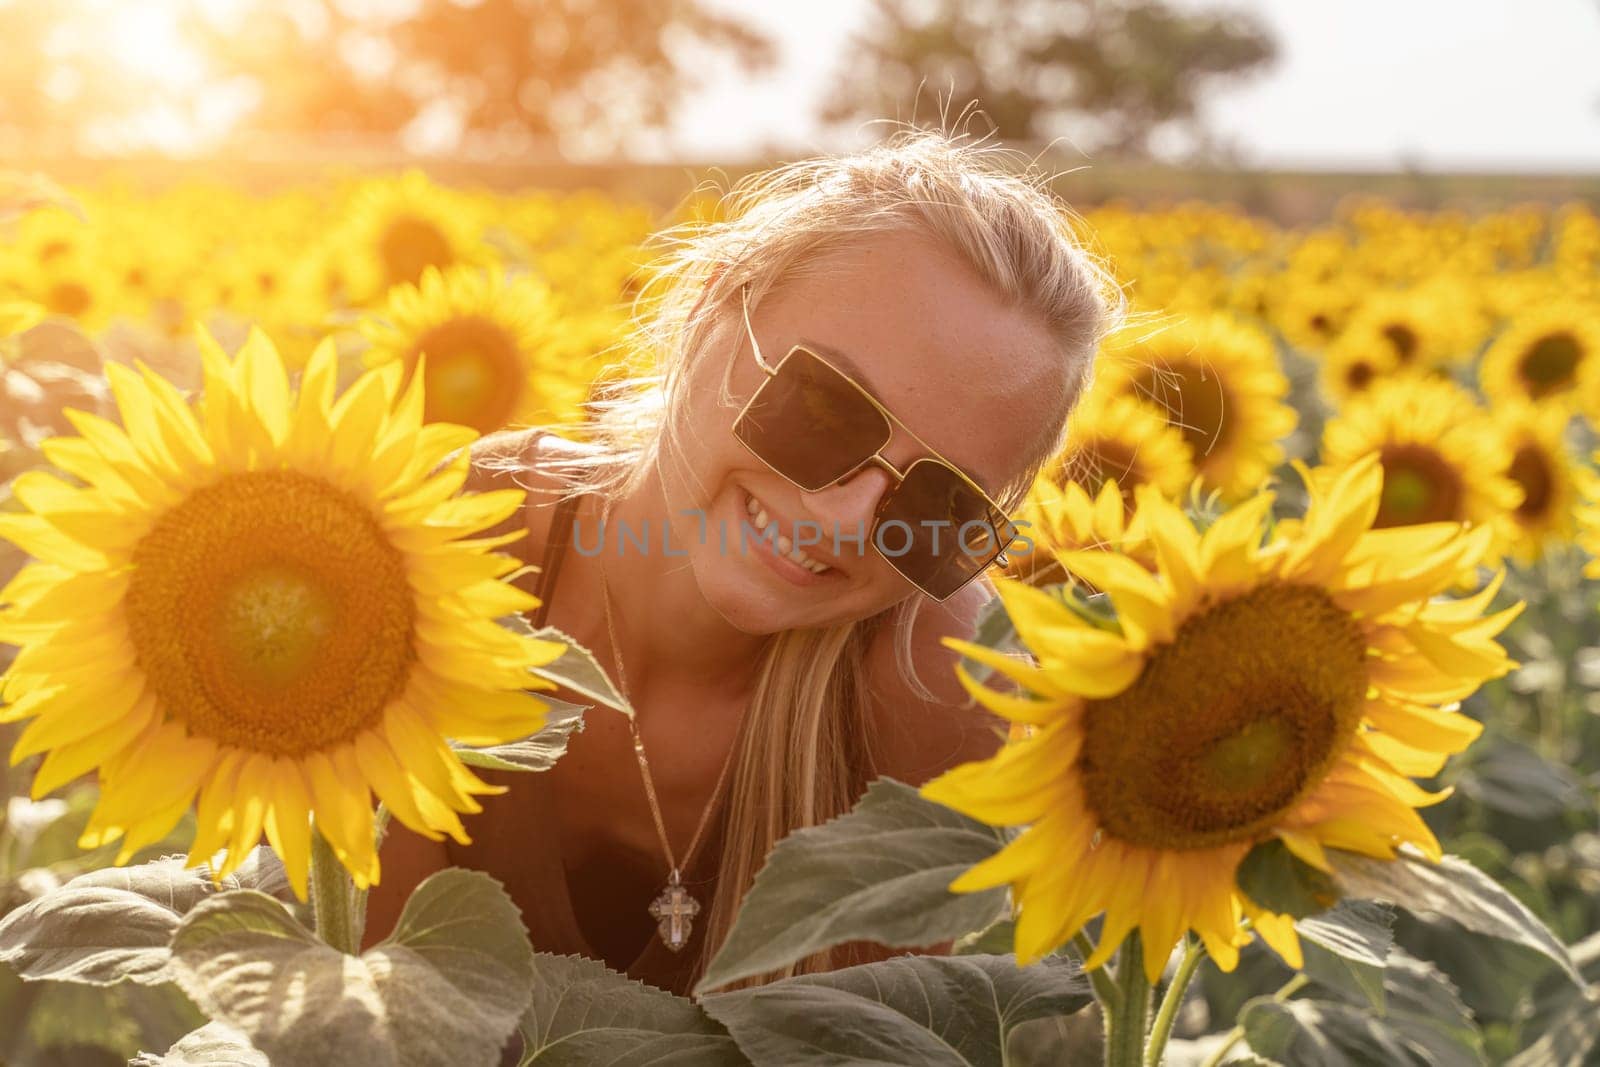 Beautiful woman in sunflower field at sunset enjoying summer nature. Attractive blonde with long healthy hair